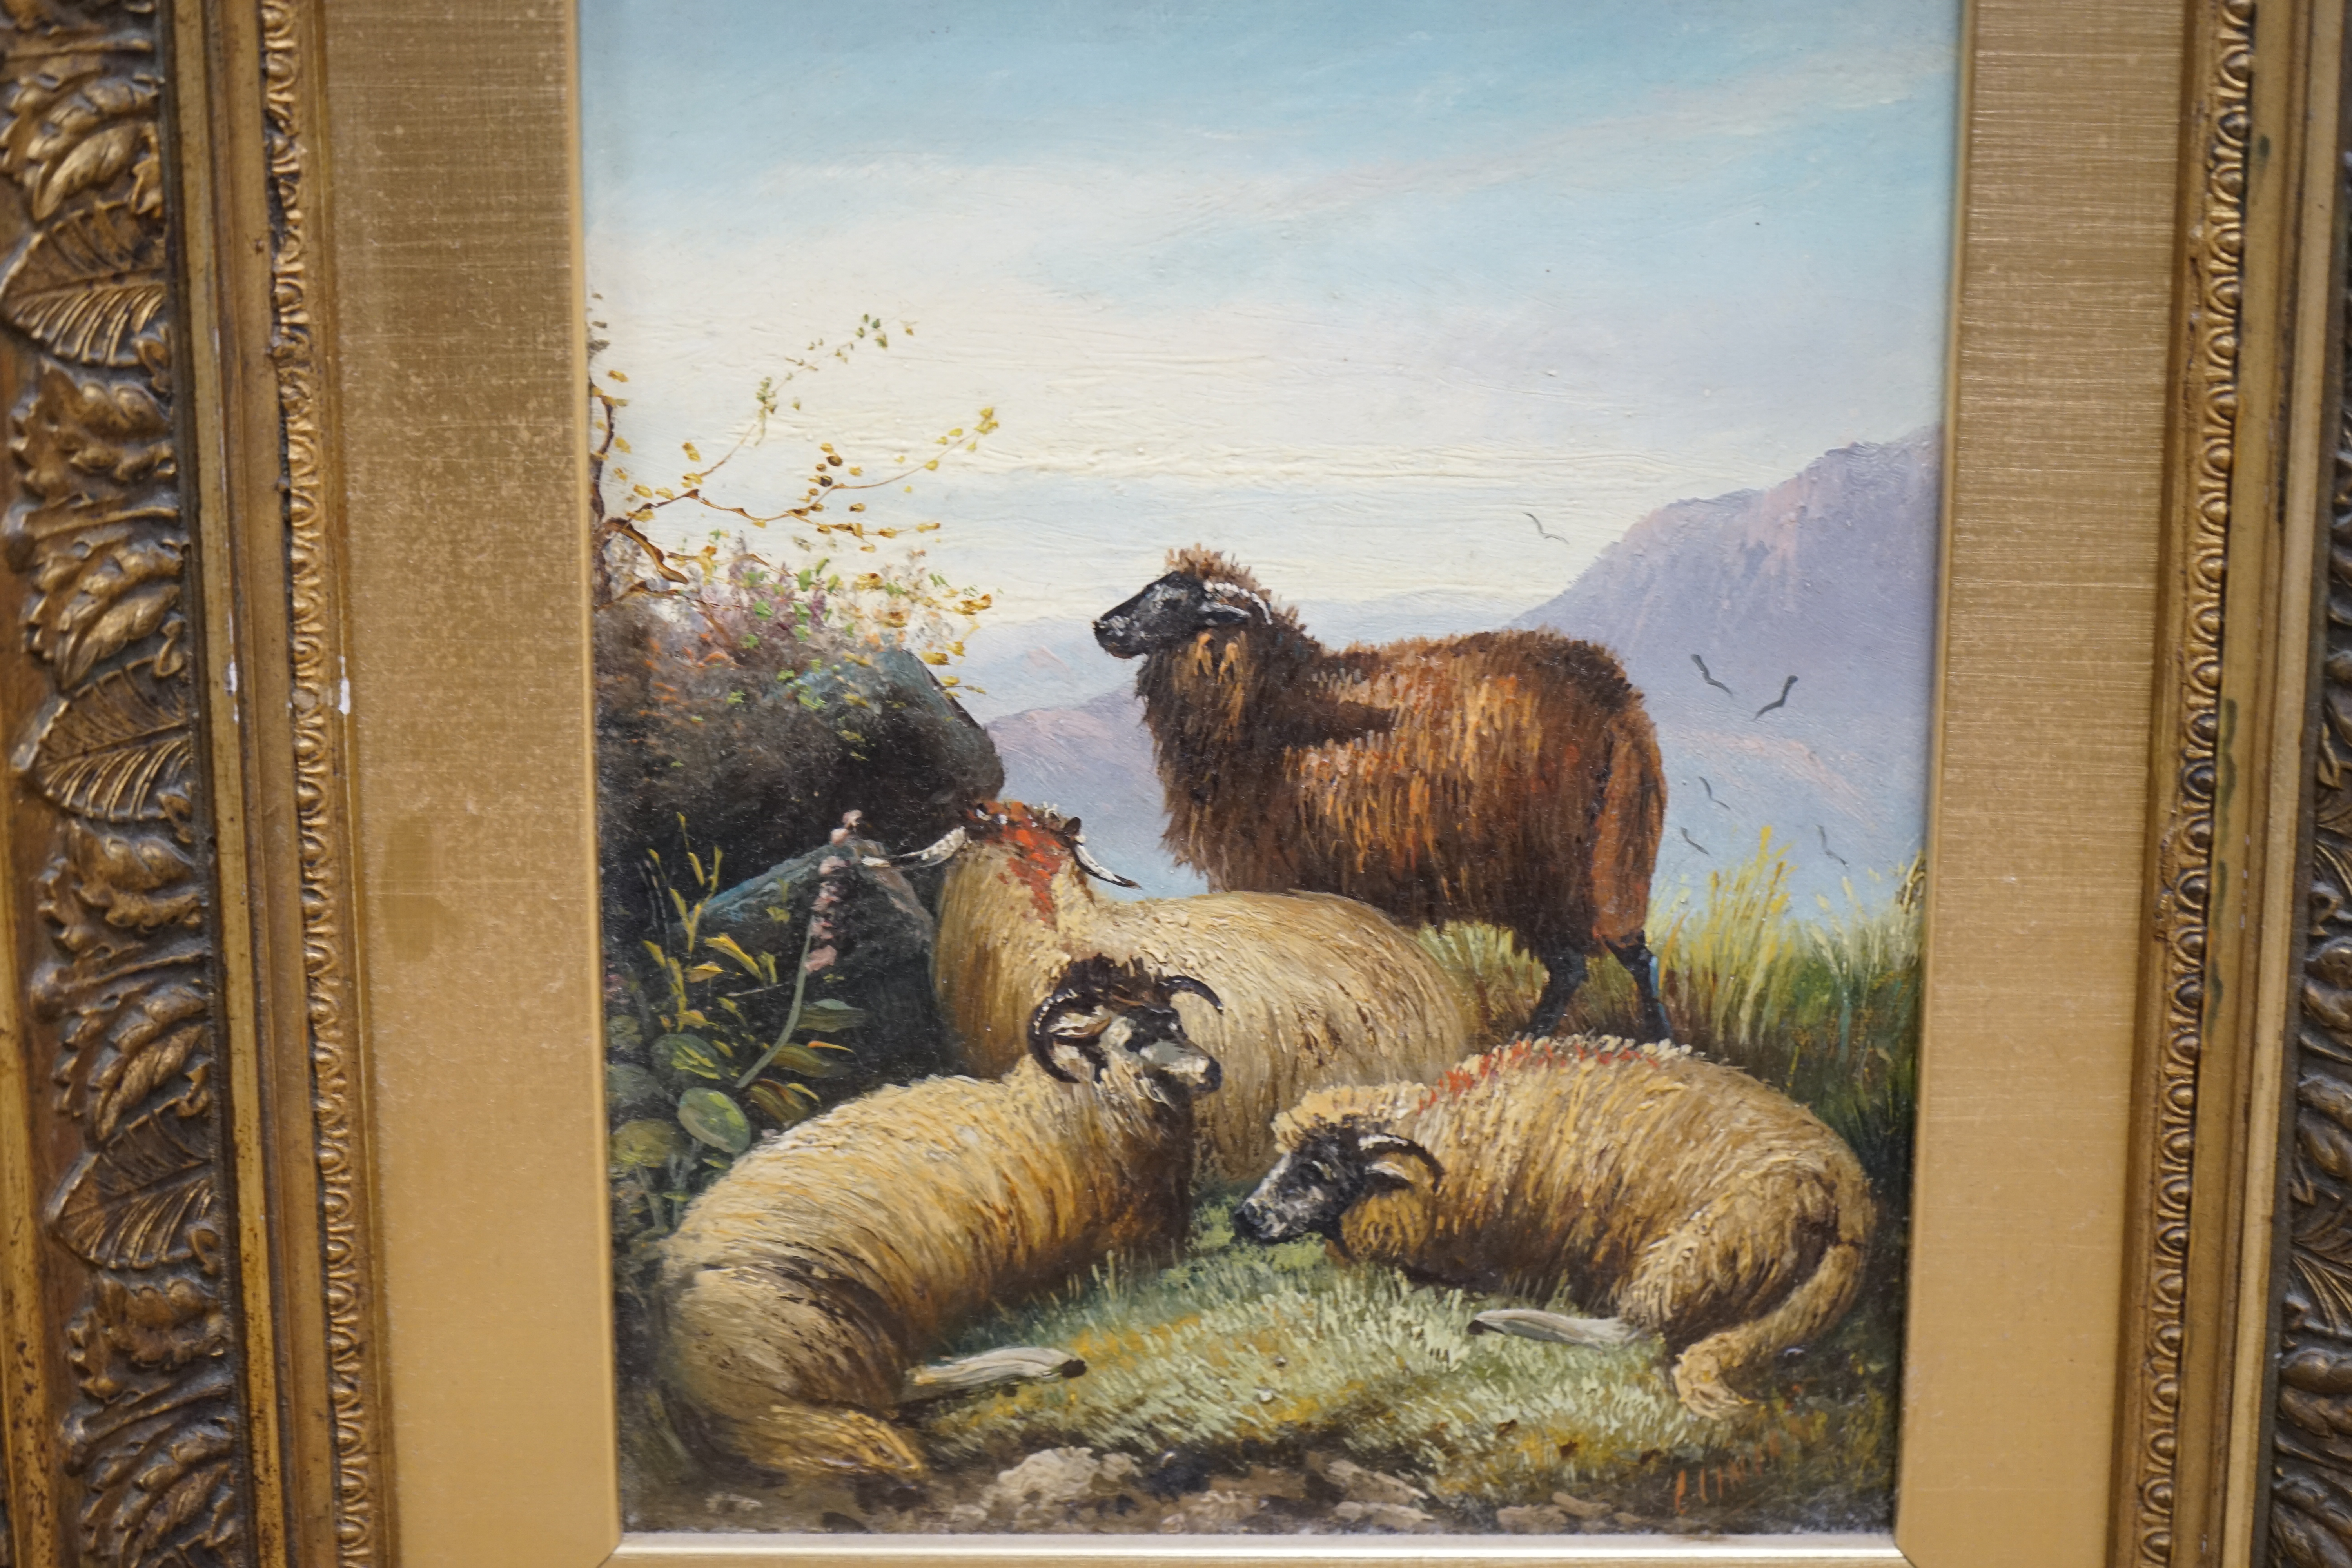 Two decorative oils on board, Flock of sheep before a landscape and Riverscape with cattle, largest 24 x 19cm, each gilt framed. Condition - fair